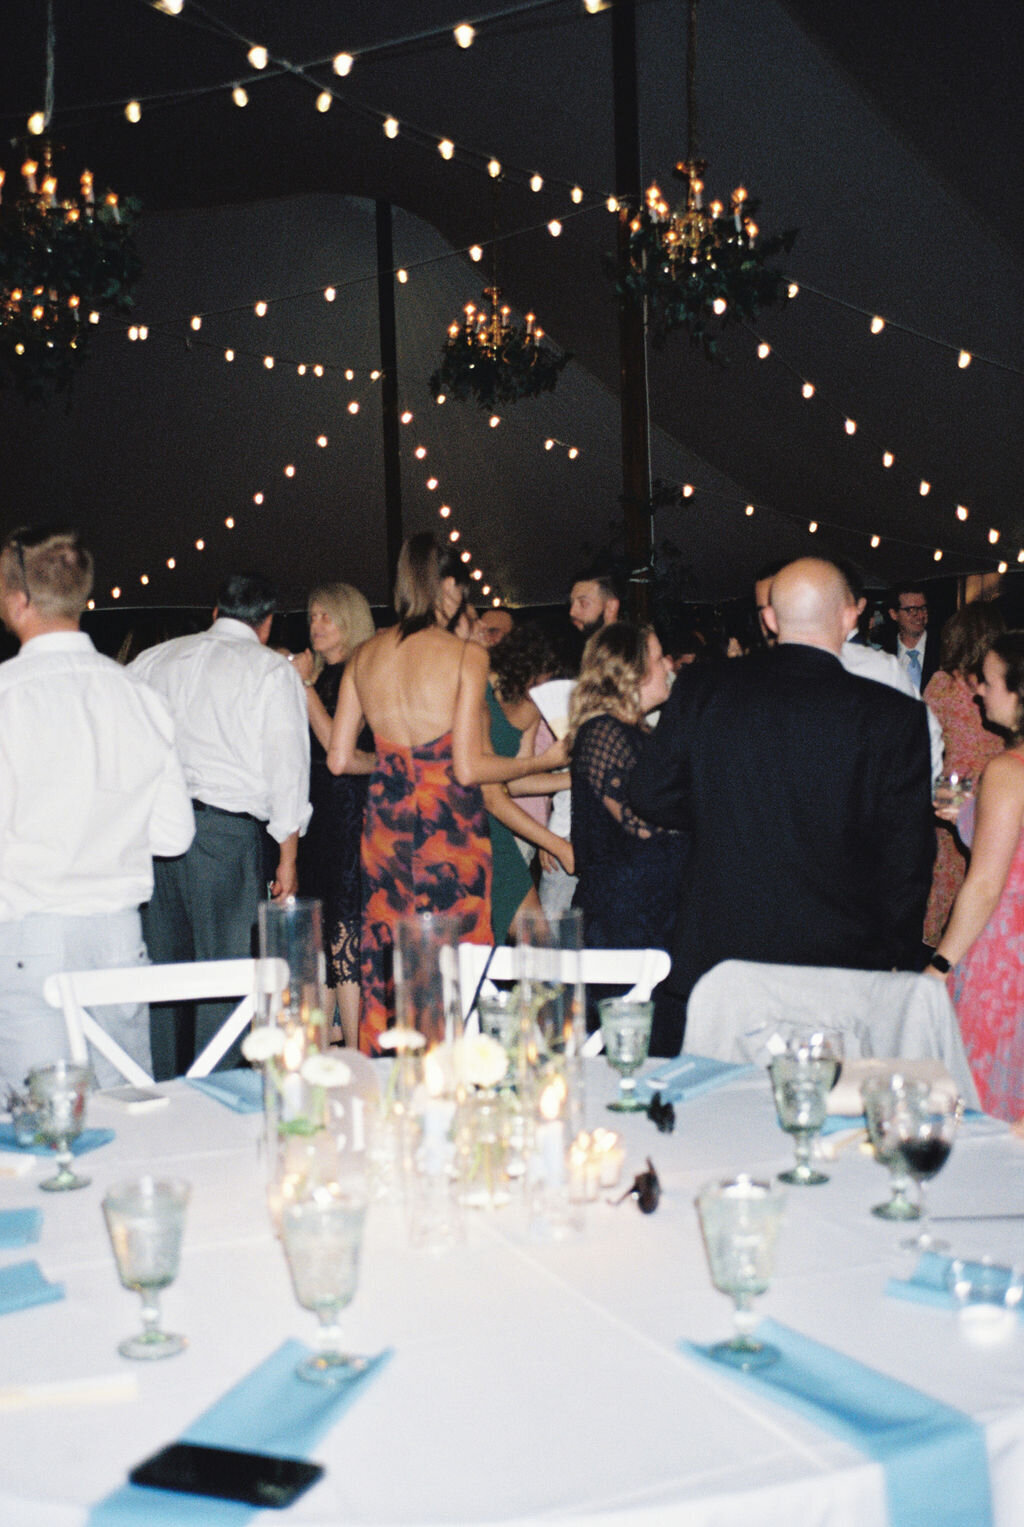 Guests dancing in the tent at night at Brittland Estate.